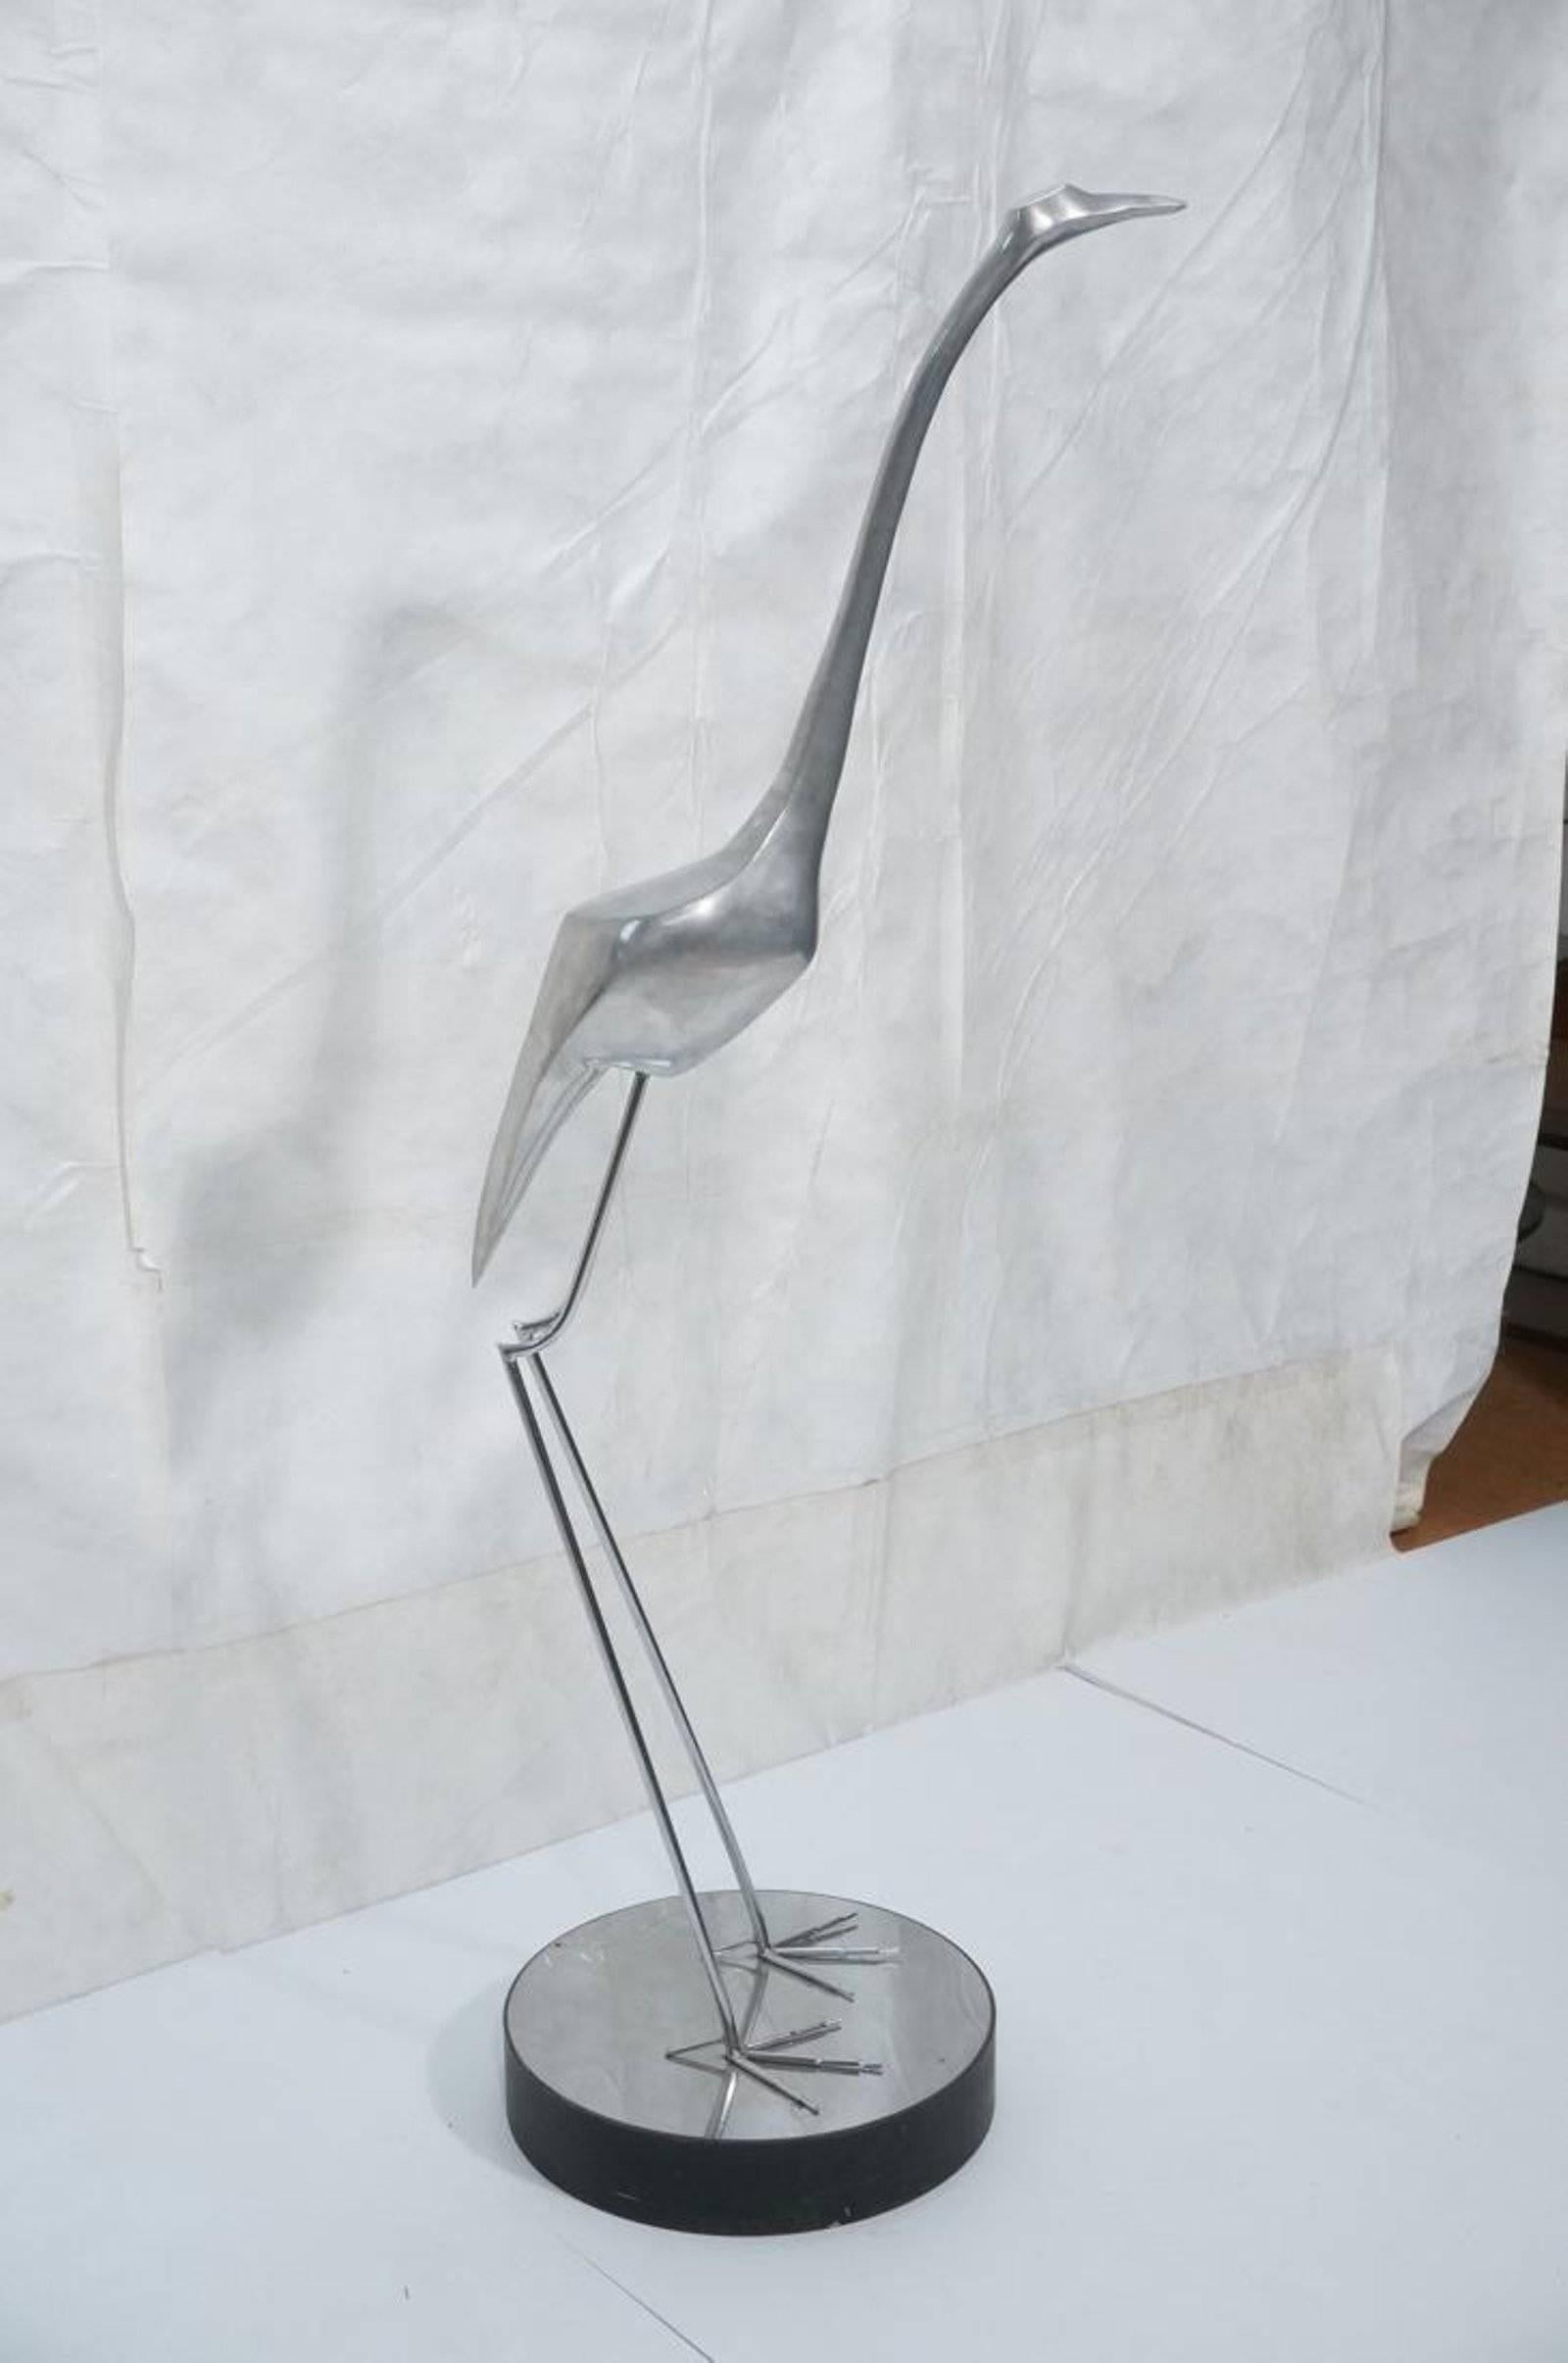 Large midcentury sculpture of a standing egret, in the style of Maison Jansen, raised on a circular enameled base.